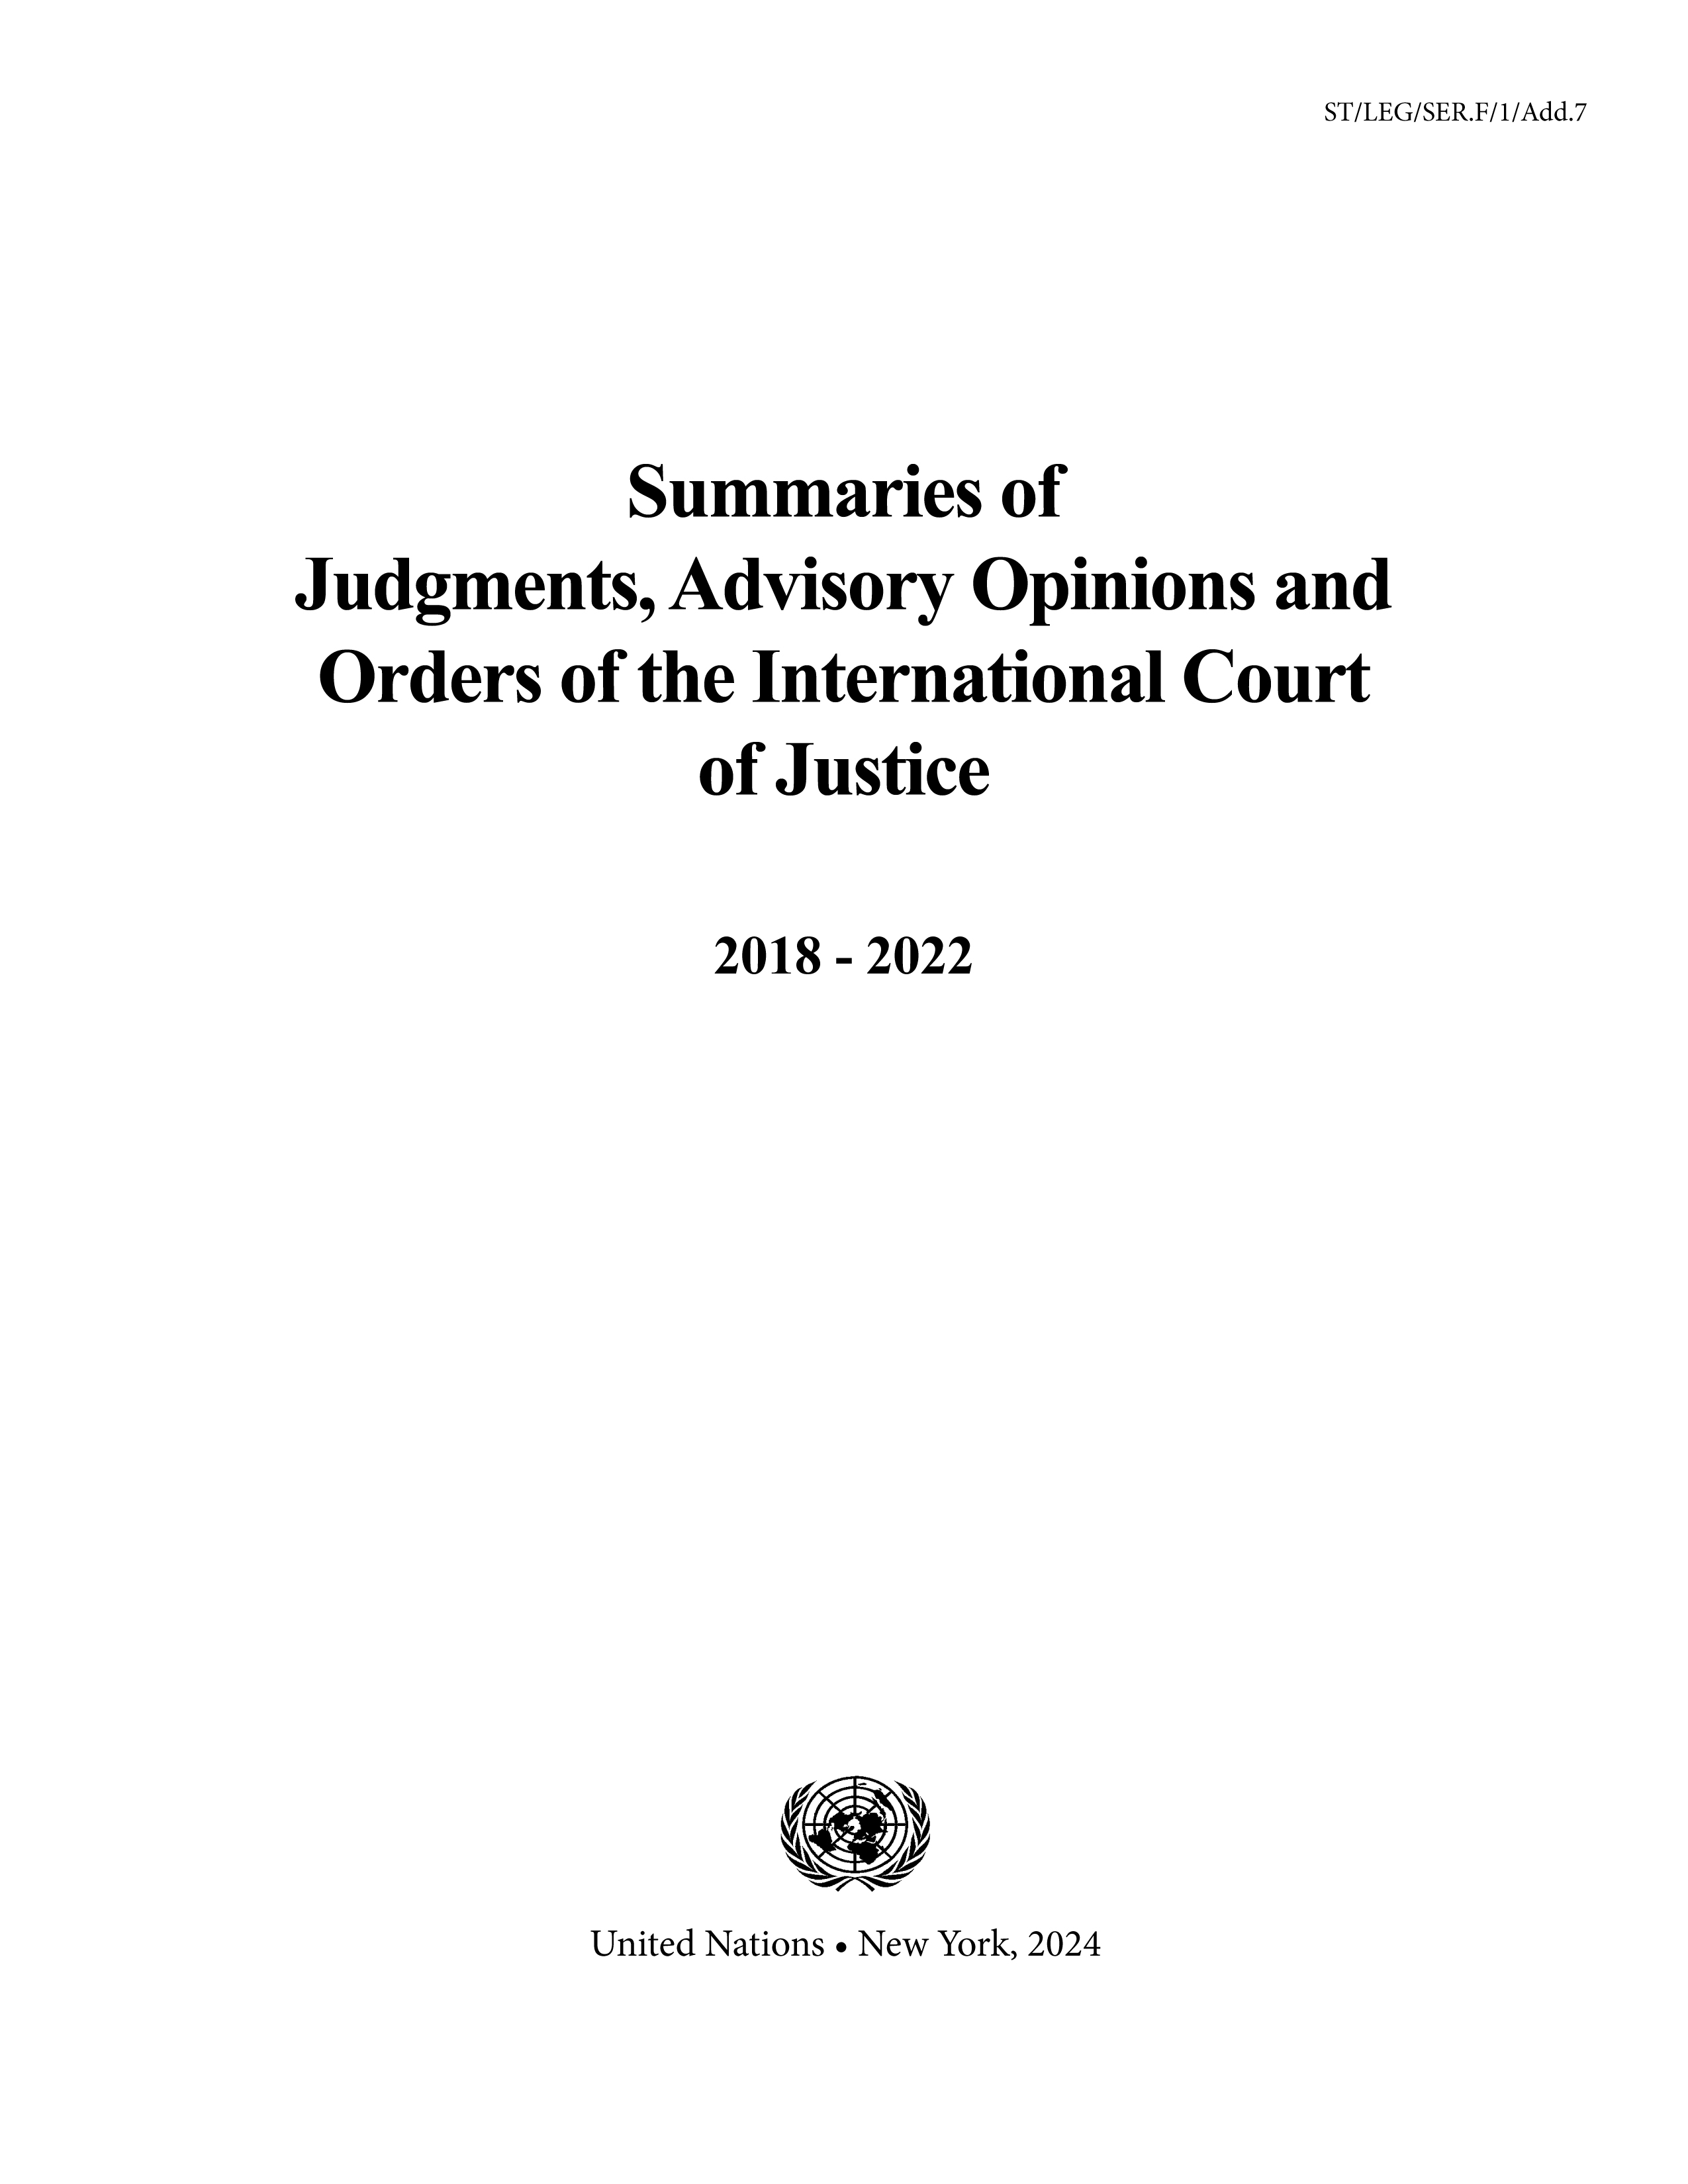 image of Summaries of Judgments, Advisory Opinions and Orders of the International Court of Justice 2018-2022